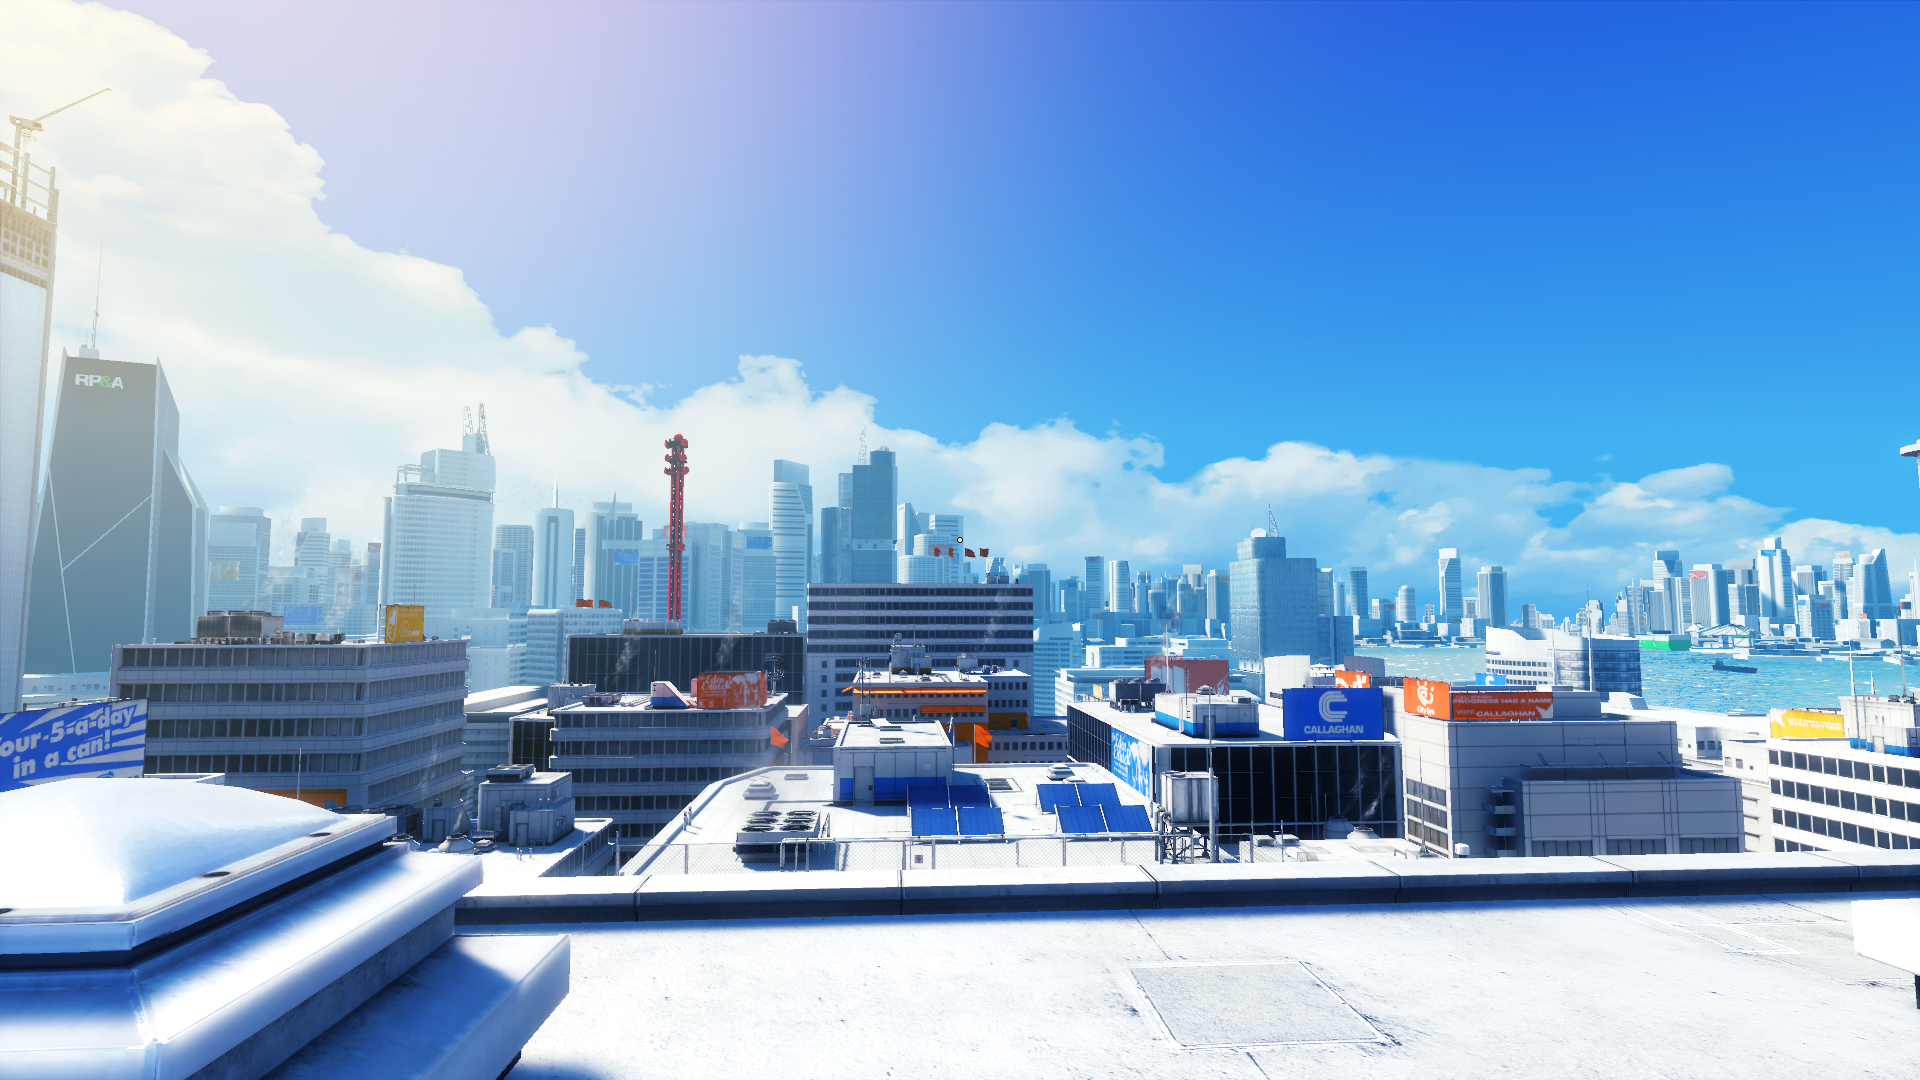 Mirror's Edge wallpapers for desktop, download free Mirror's Edge pictures  and backgrounds for PC 